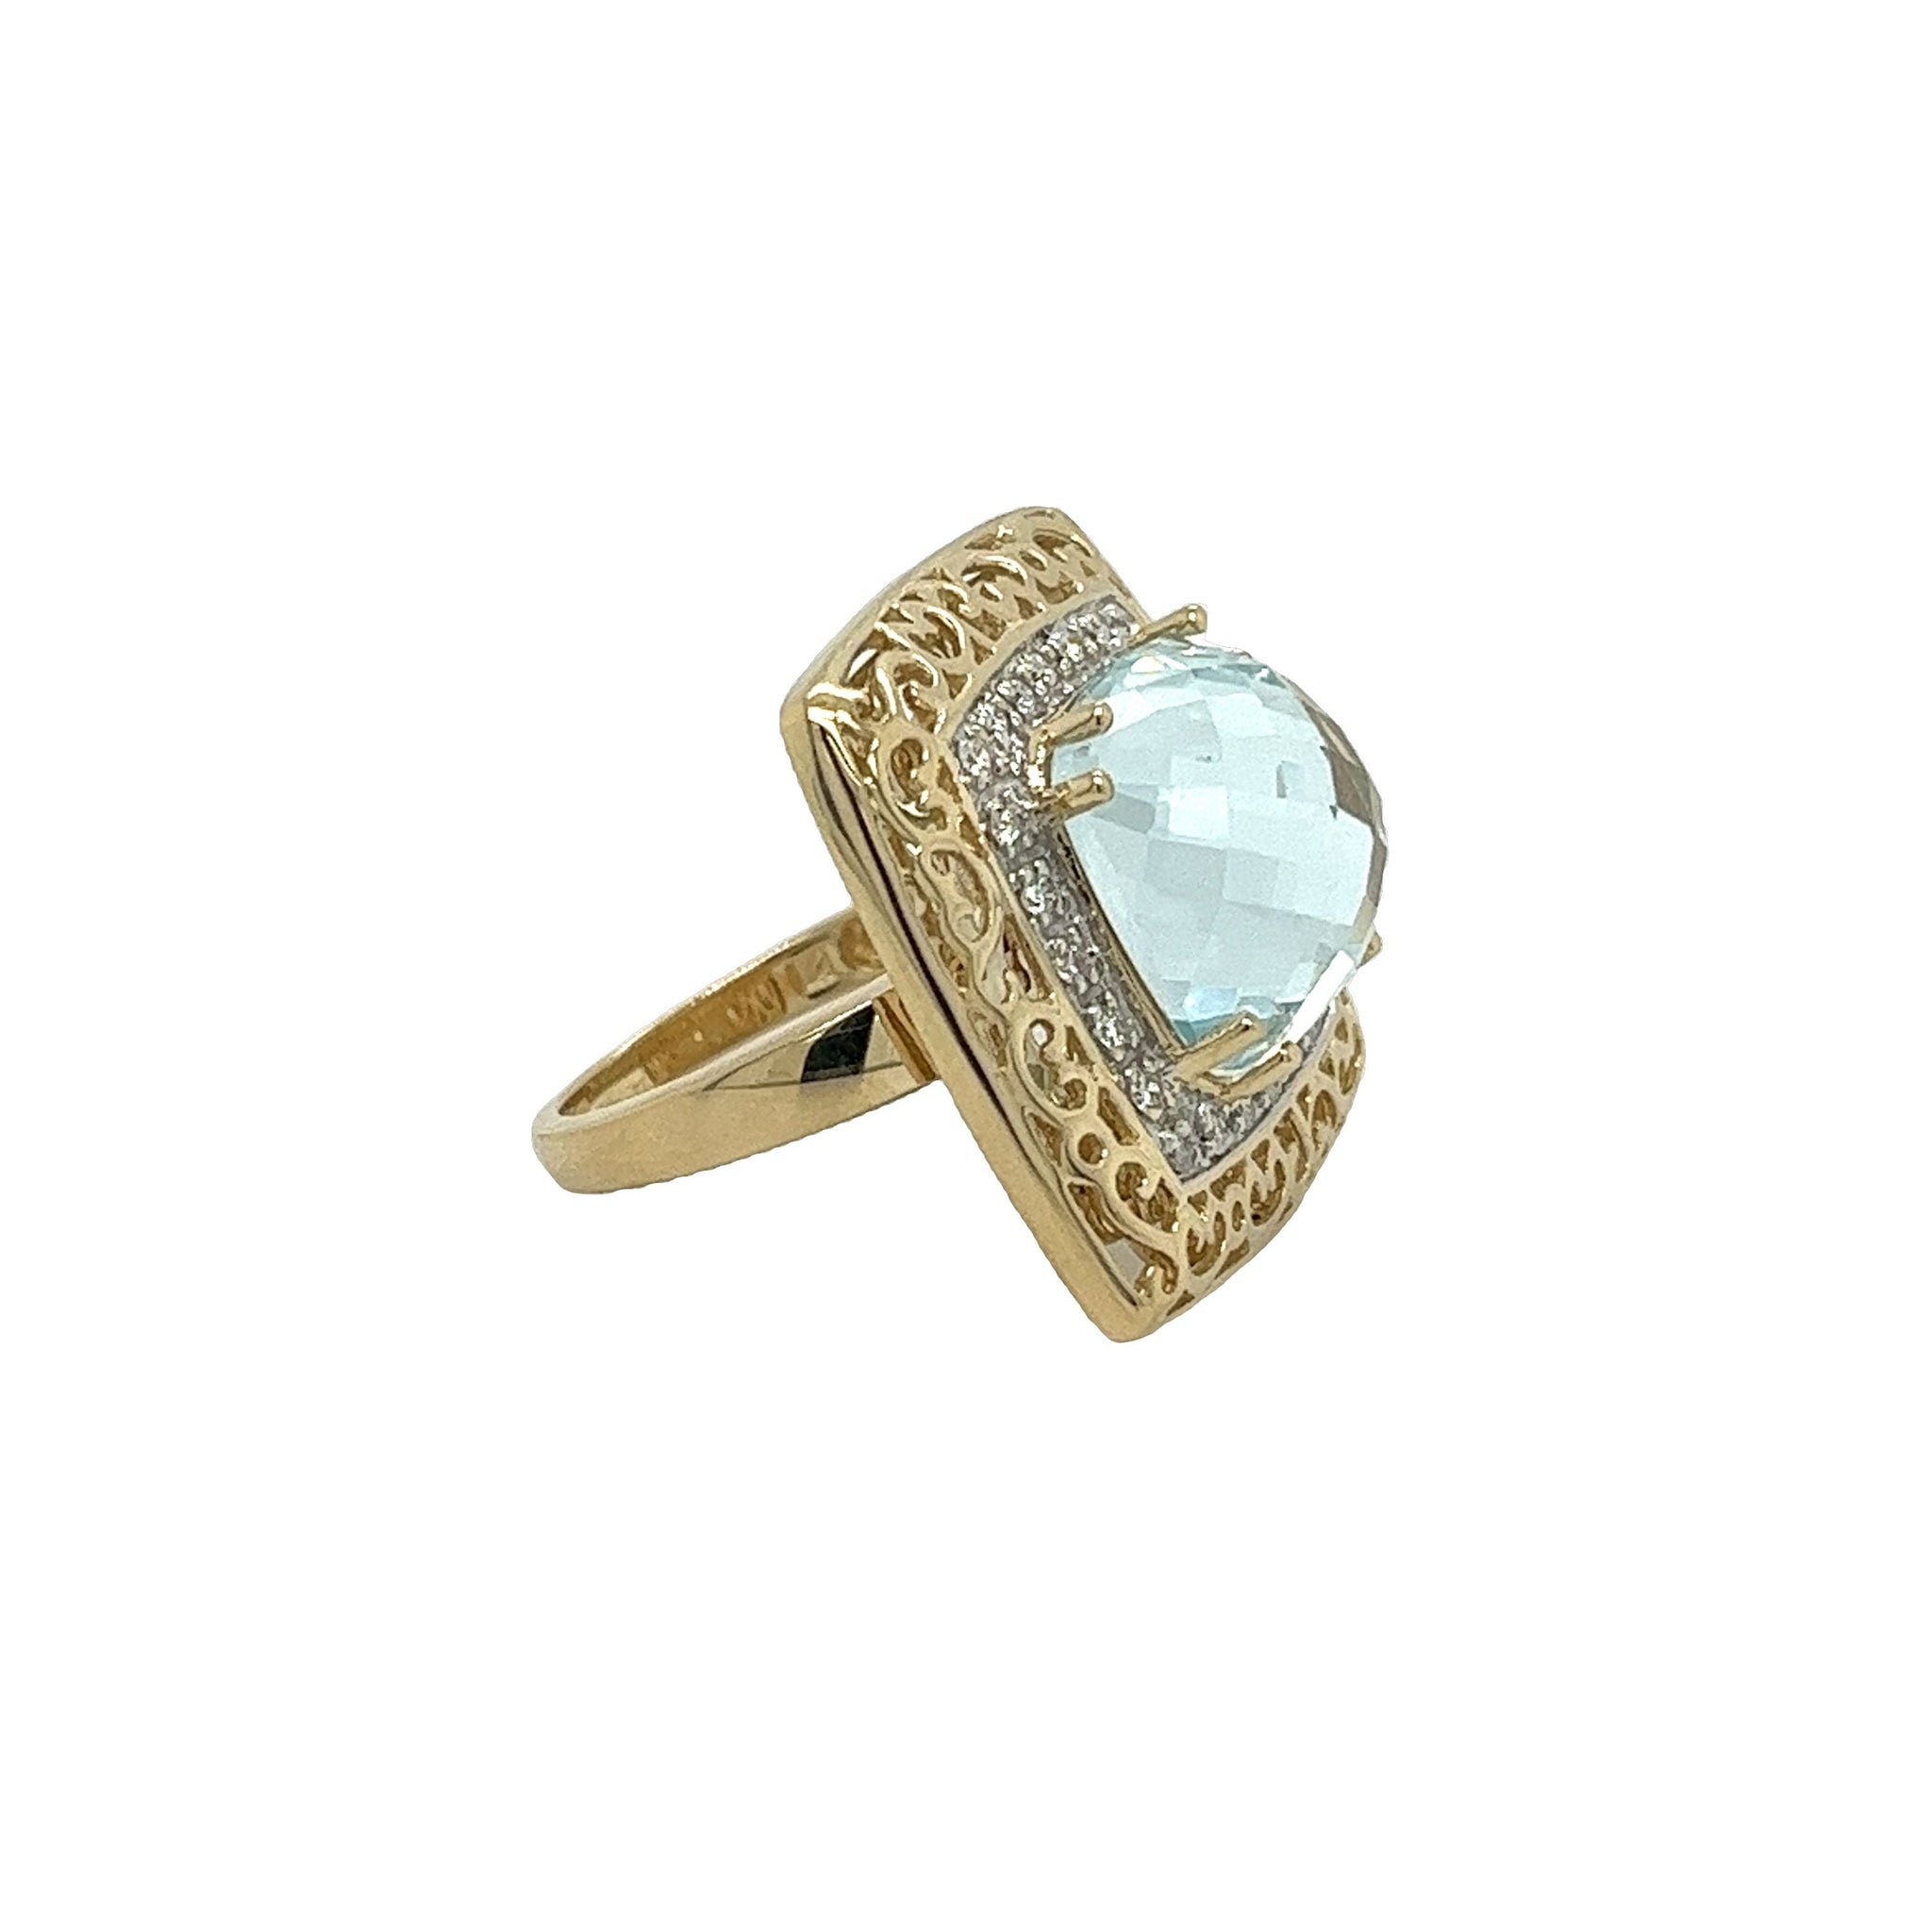 Sky Blue Topaz and Diamond Ring in 14K Gold Curved Filigree Wide Frame-Rings-ASSAY